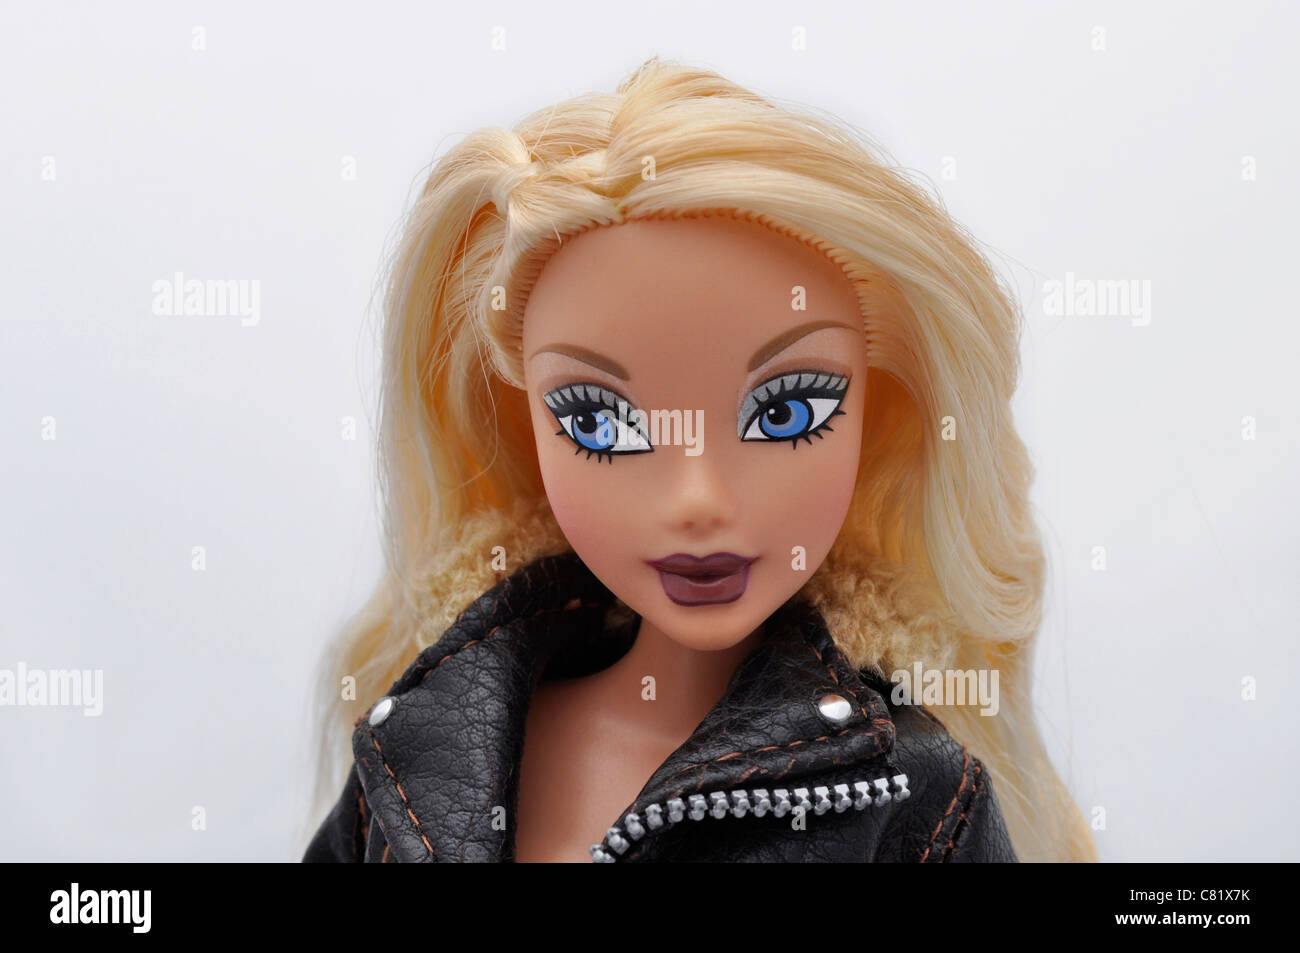 Blonde My Scene Barbie Doll wearing a leather jacket, head and shoulders shot Stock Photo